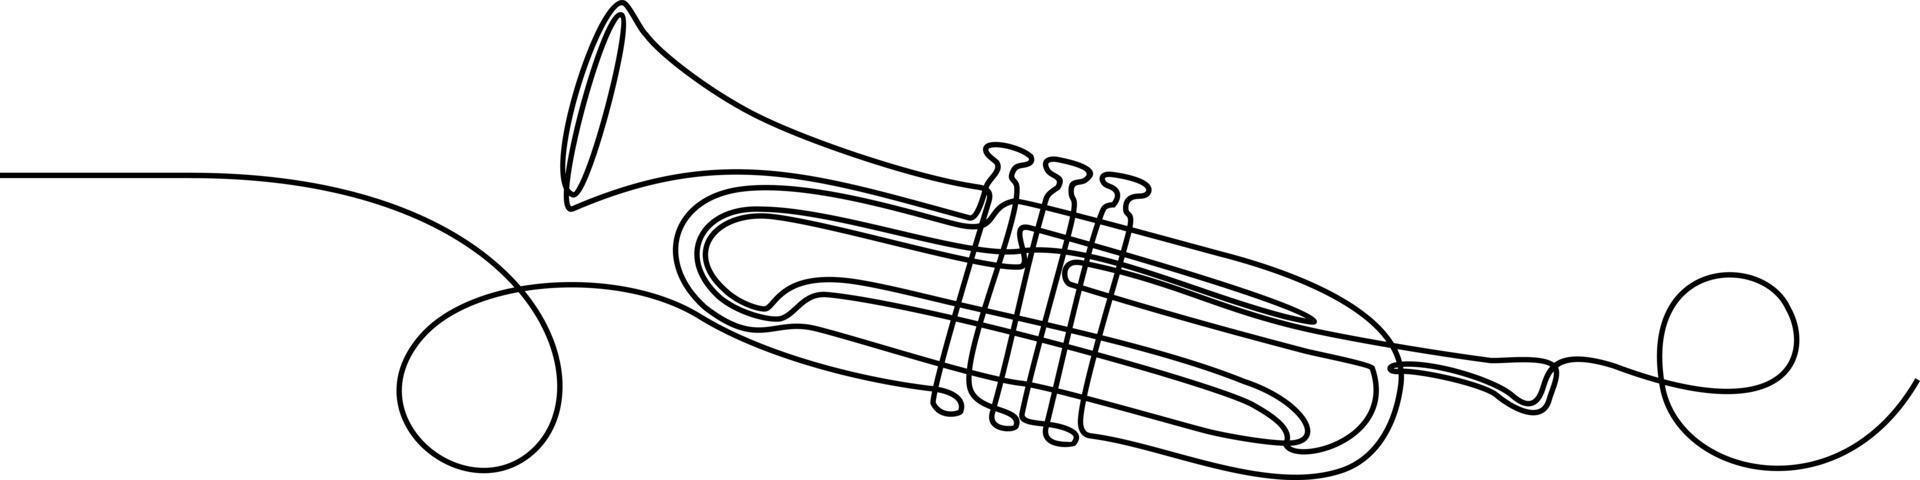 Continuous one line drawing of trumpet music instrument vector